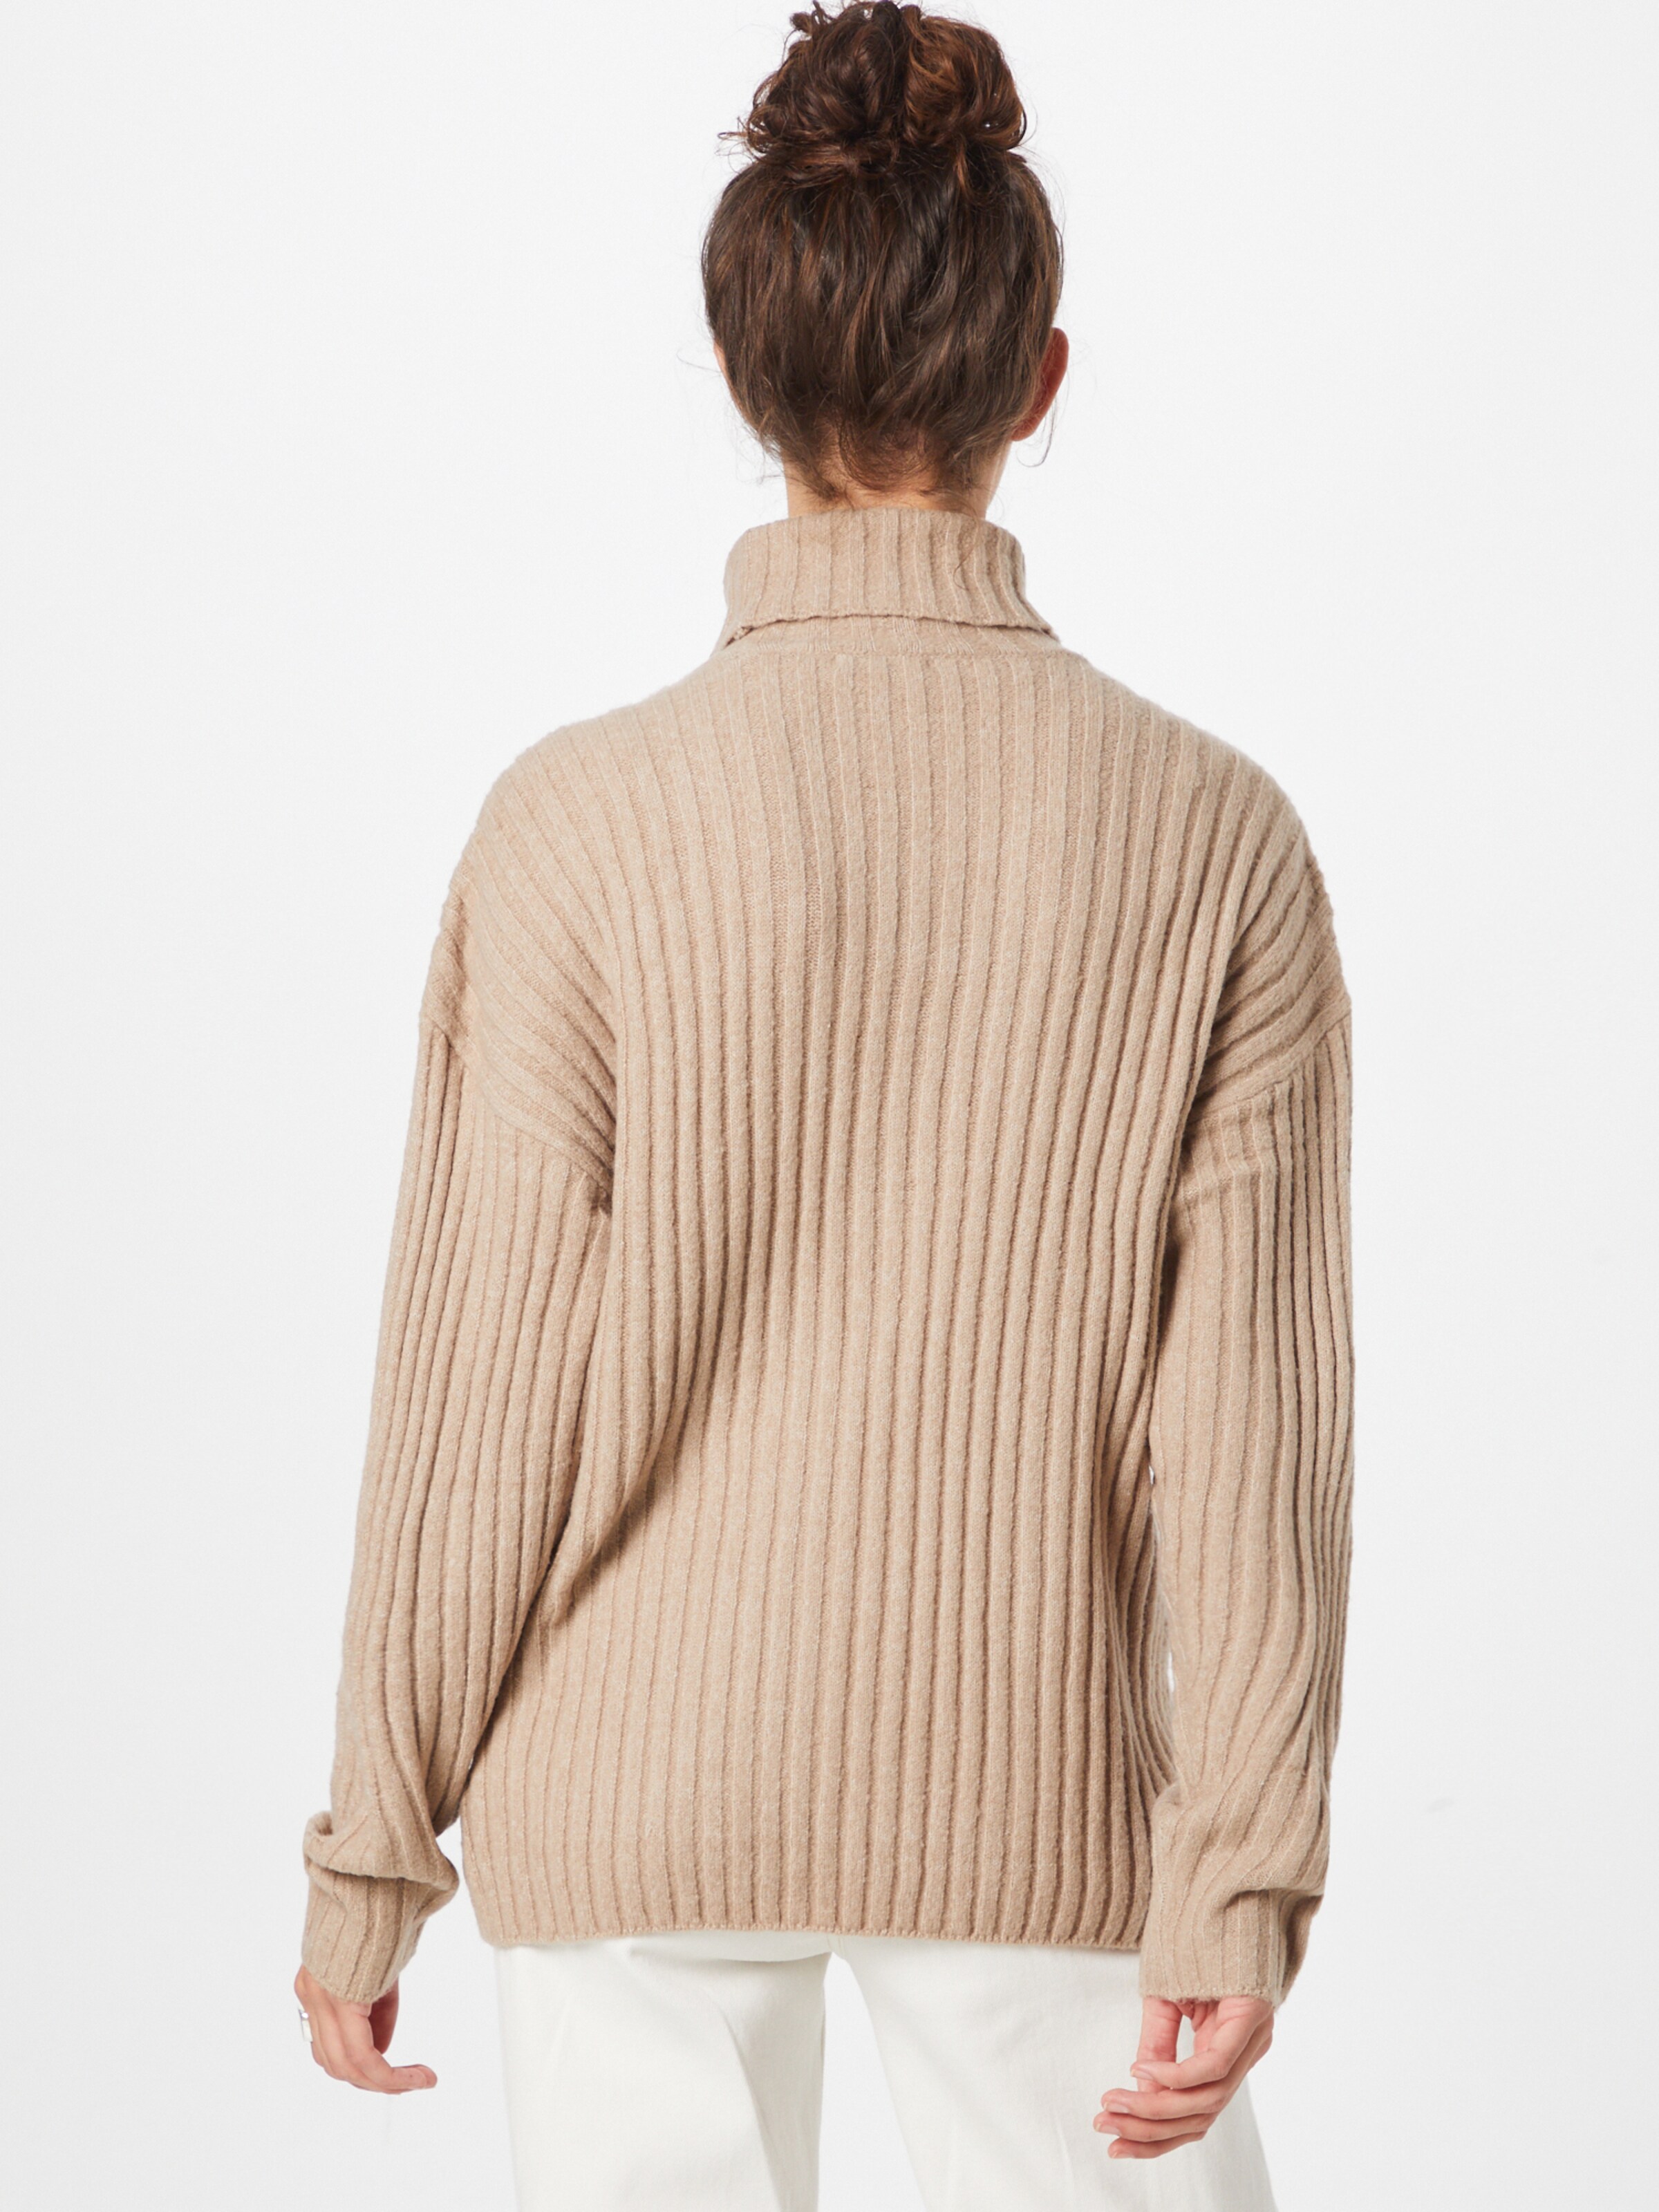 Stitch and Soul Pullover in Beige 